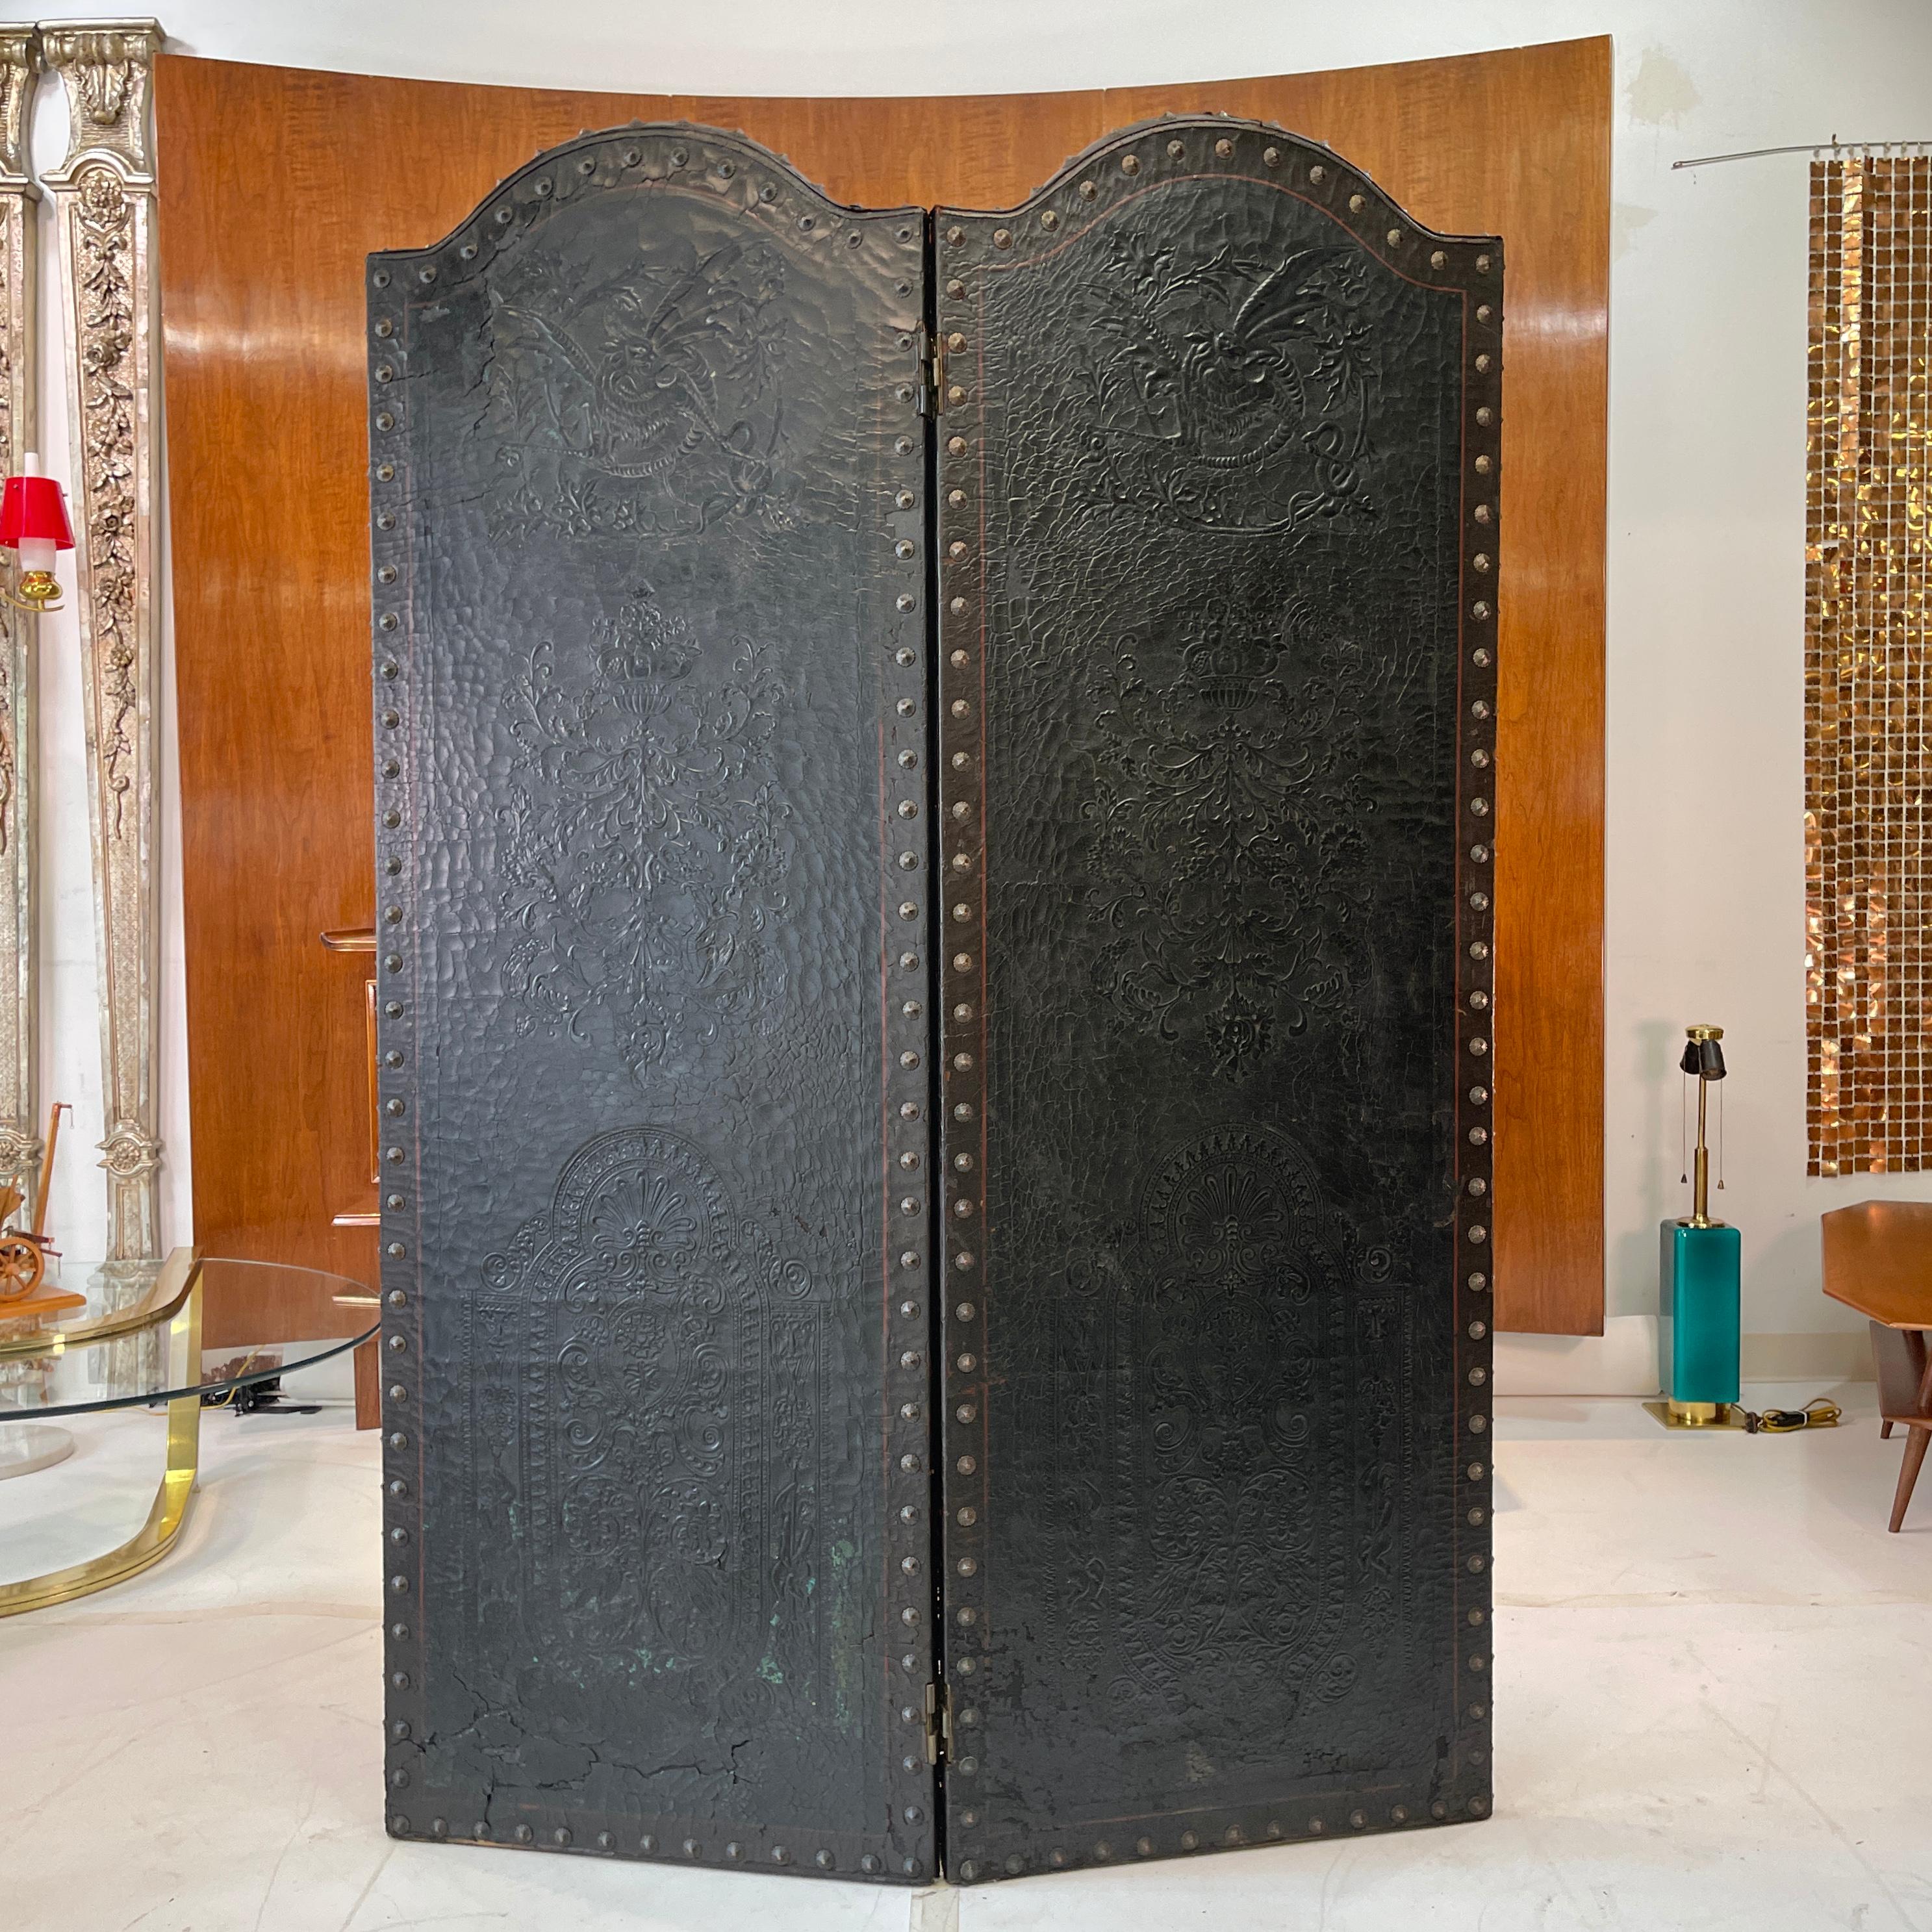 Two panel Italian floor screen (paravent / divisore) room divider in embossed Florentine leather on a hinged wood frame backed with blackened cotton duck canvas embellished with decorative bronzed metal tacks, circa 1928. Overall distressed